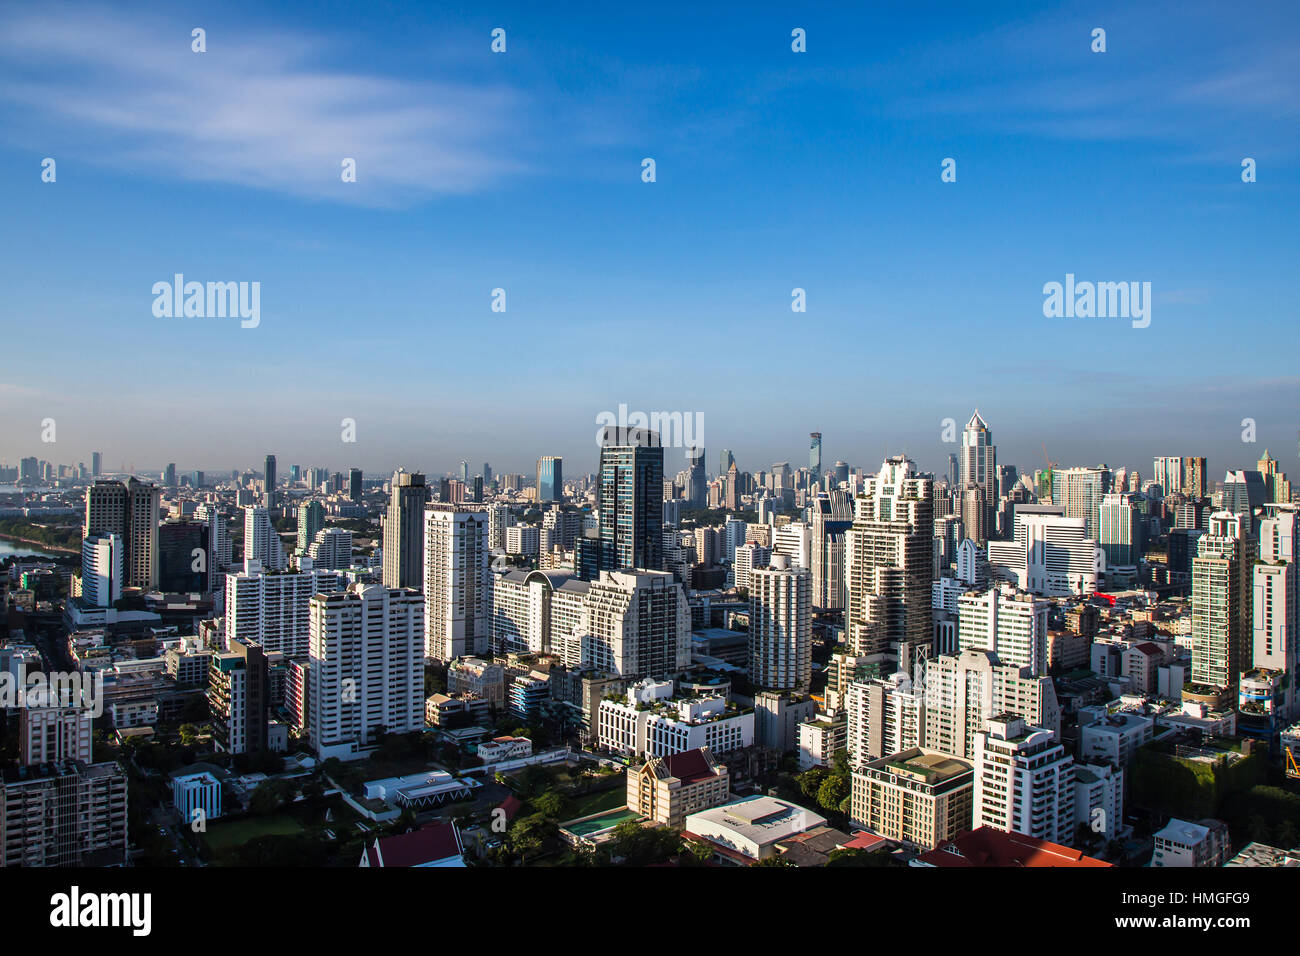 Cityscape under clouds and blue sky. Stock Photo